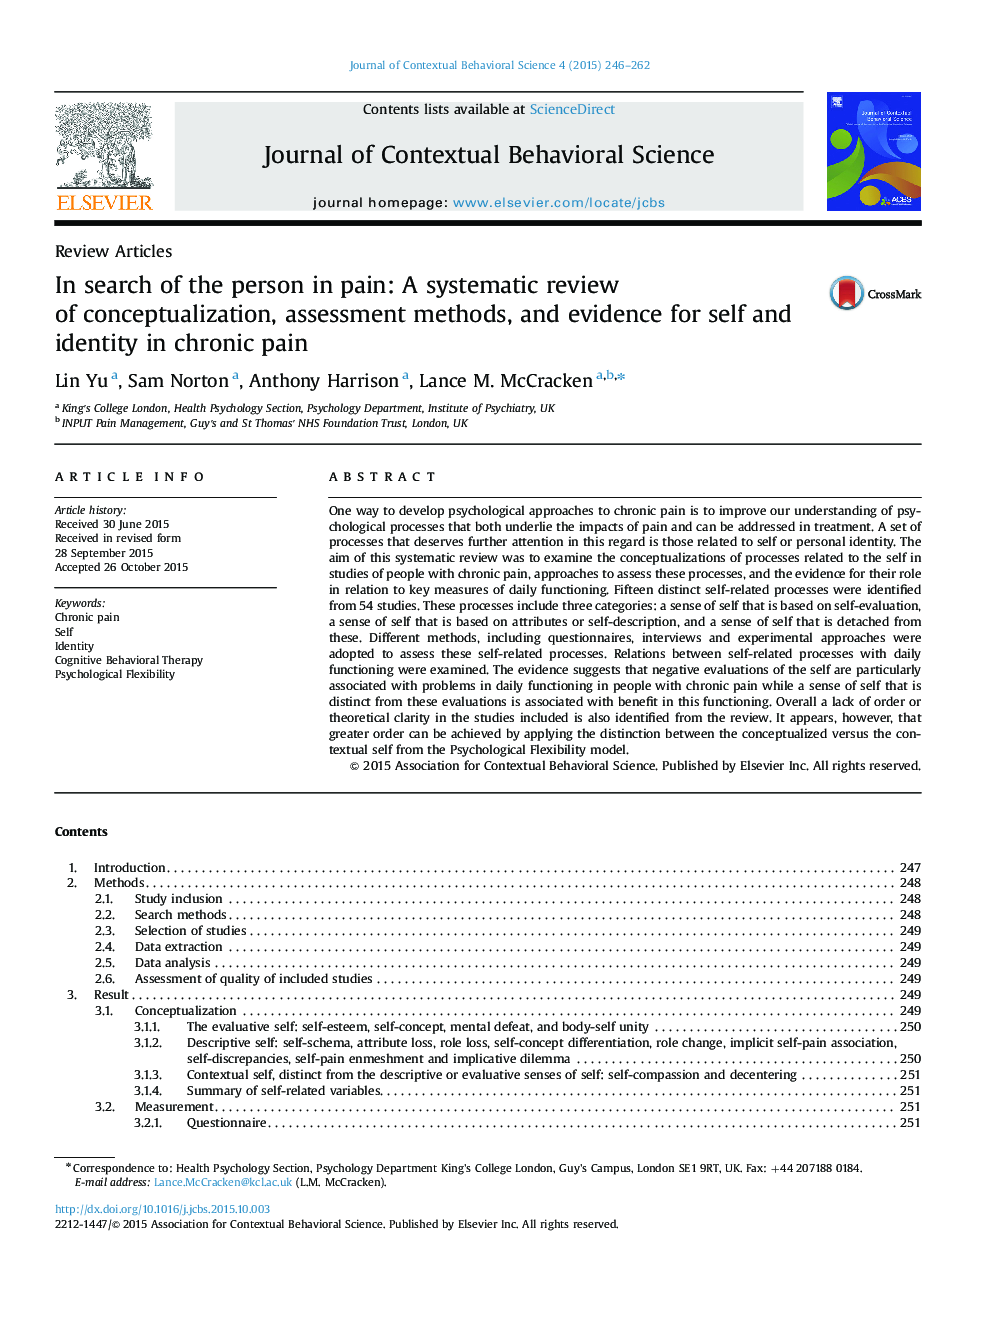 In search of the person in pain: A systematic review of conceptualization, assessment methods, and evidence for self and identity in chronic pain